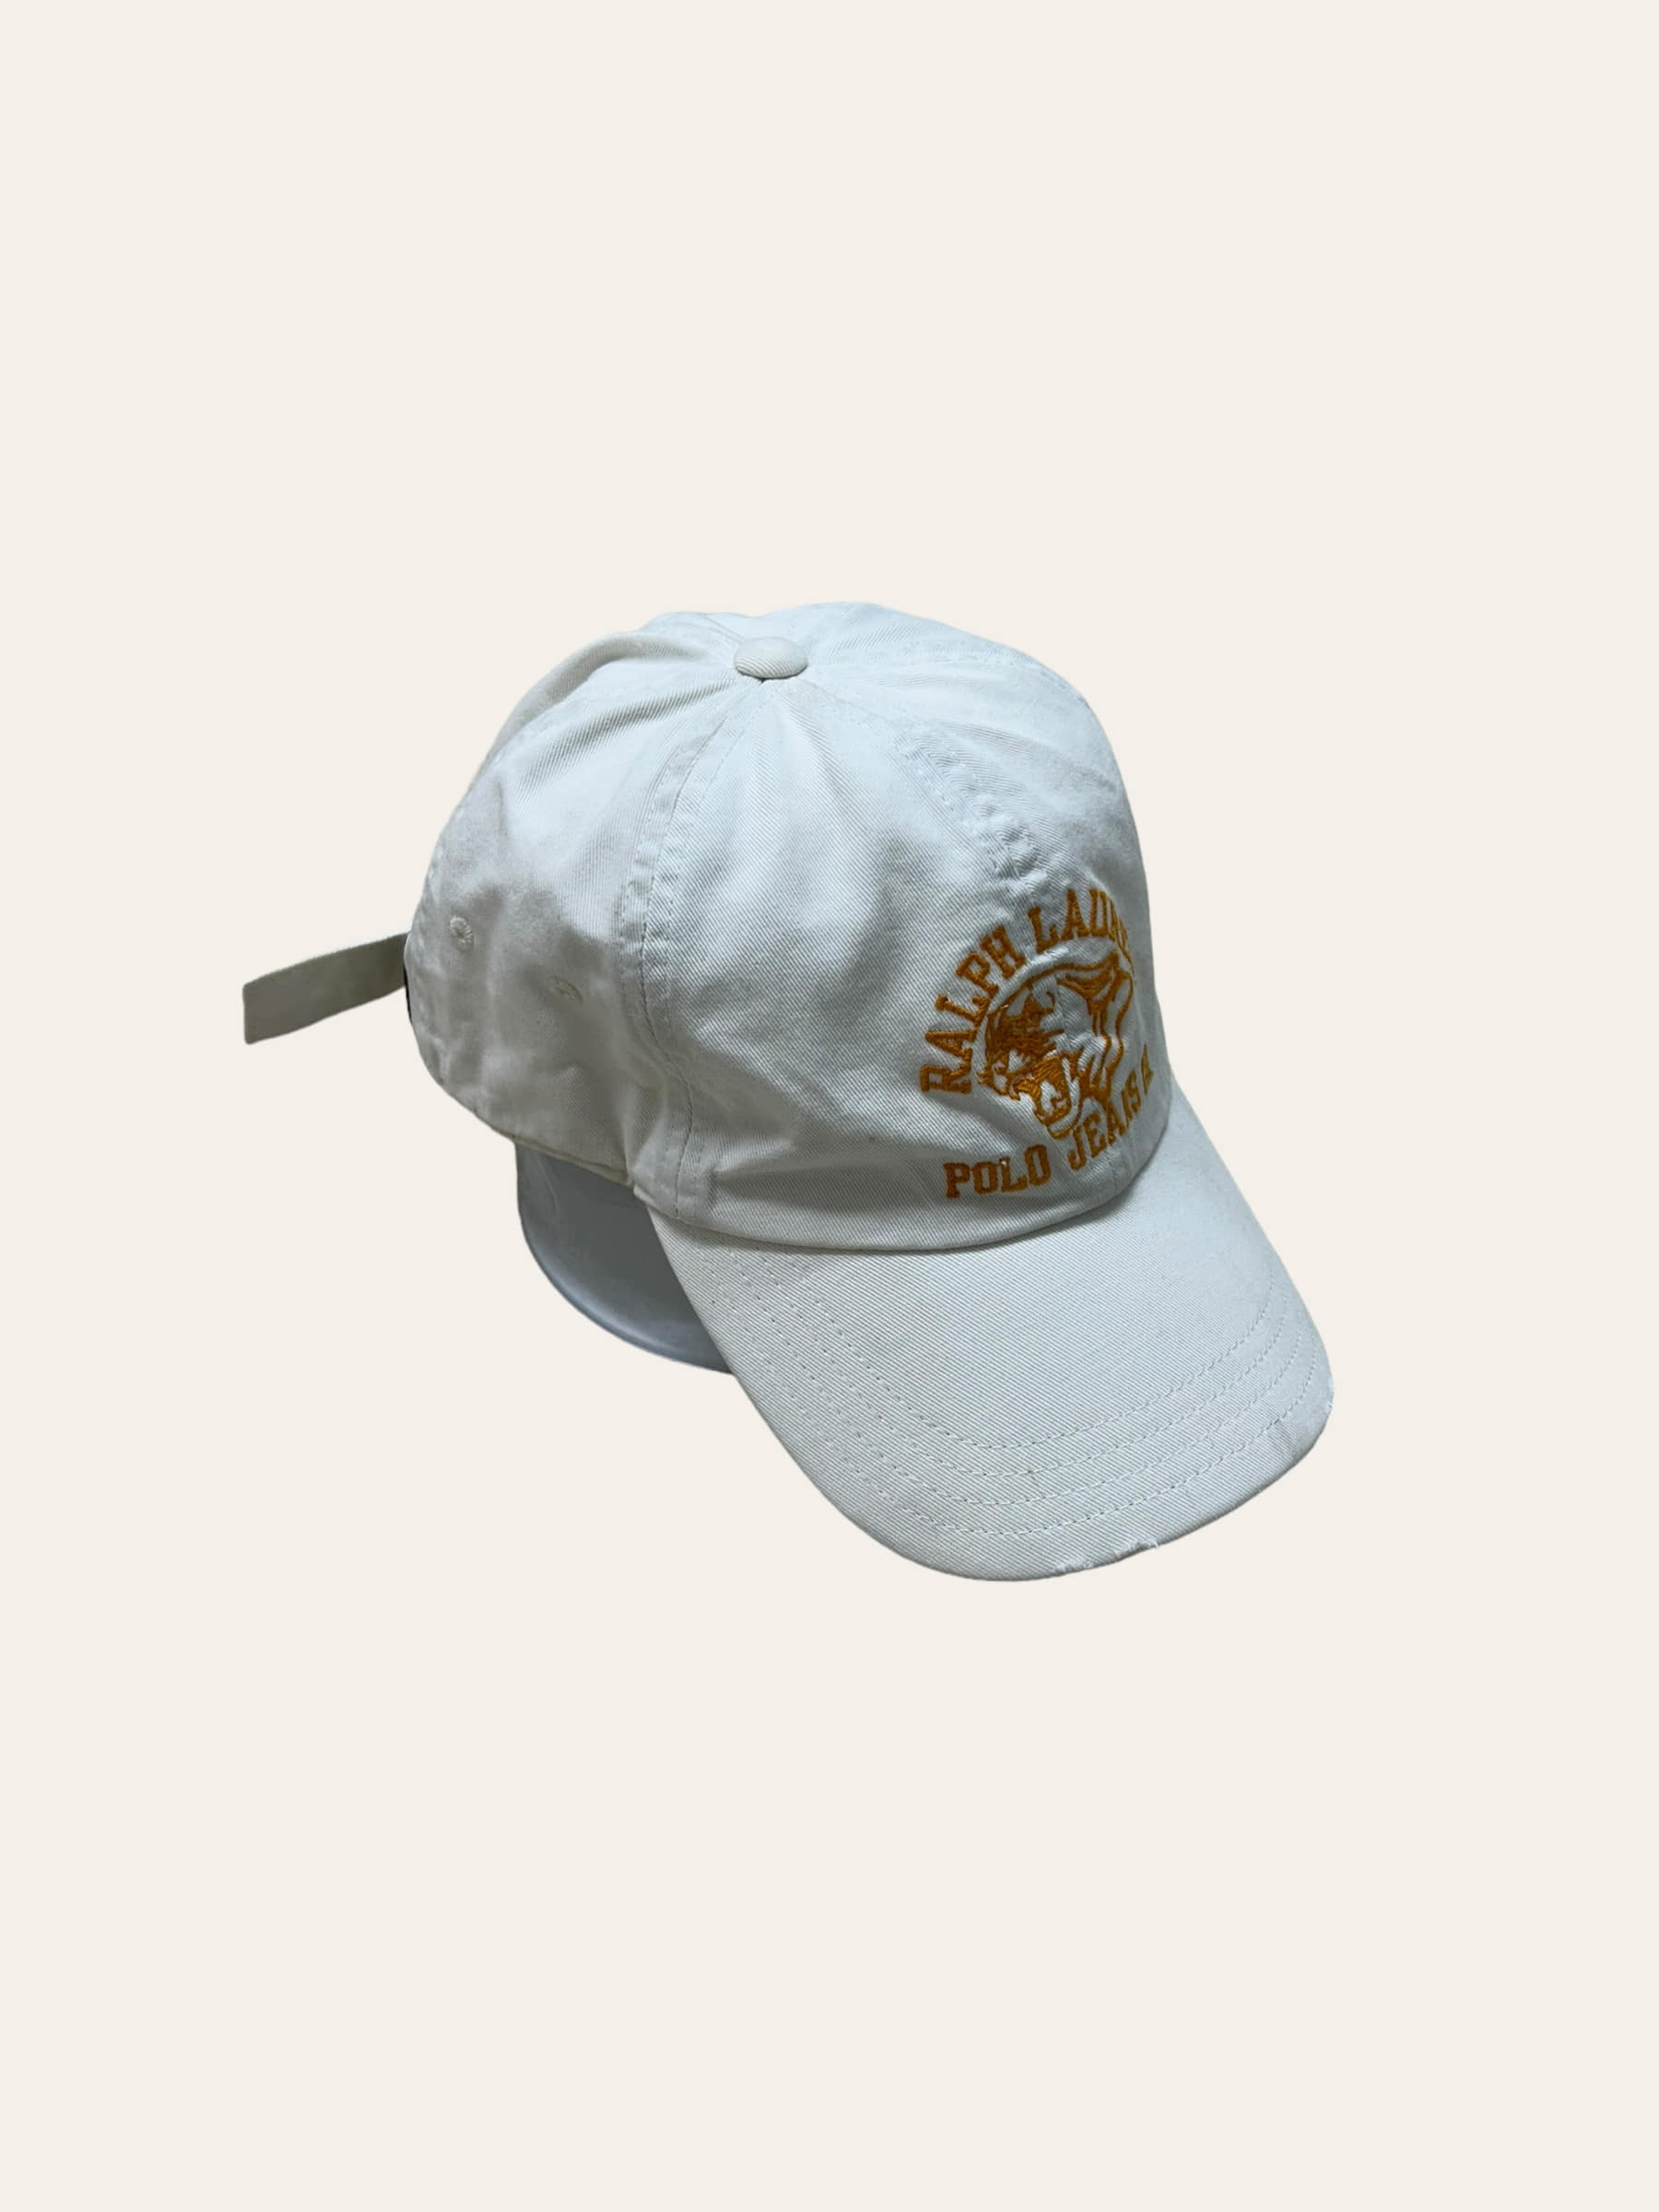 Polo jeans company white embroidered cap